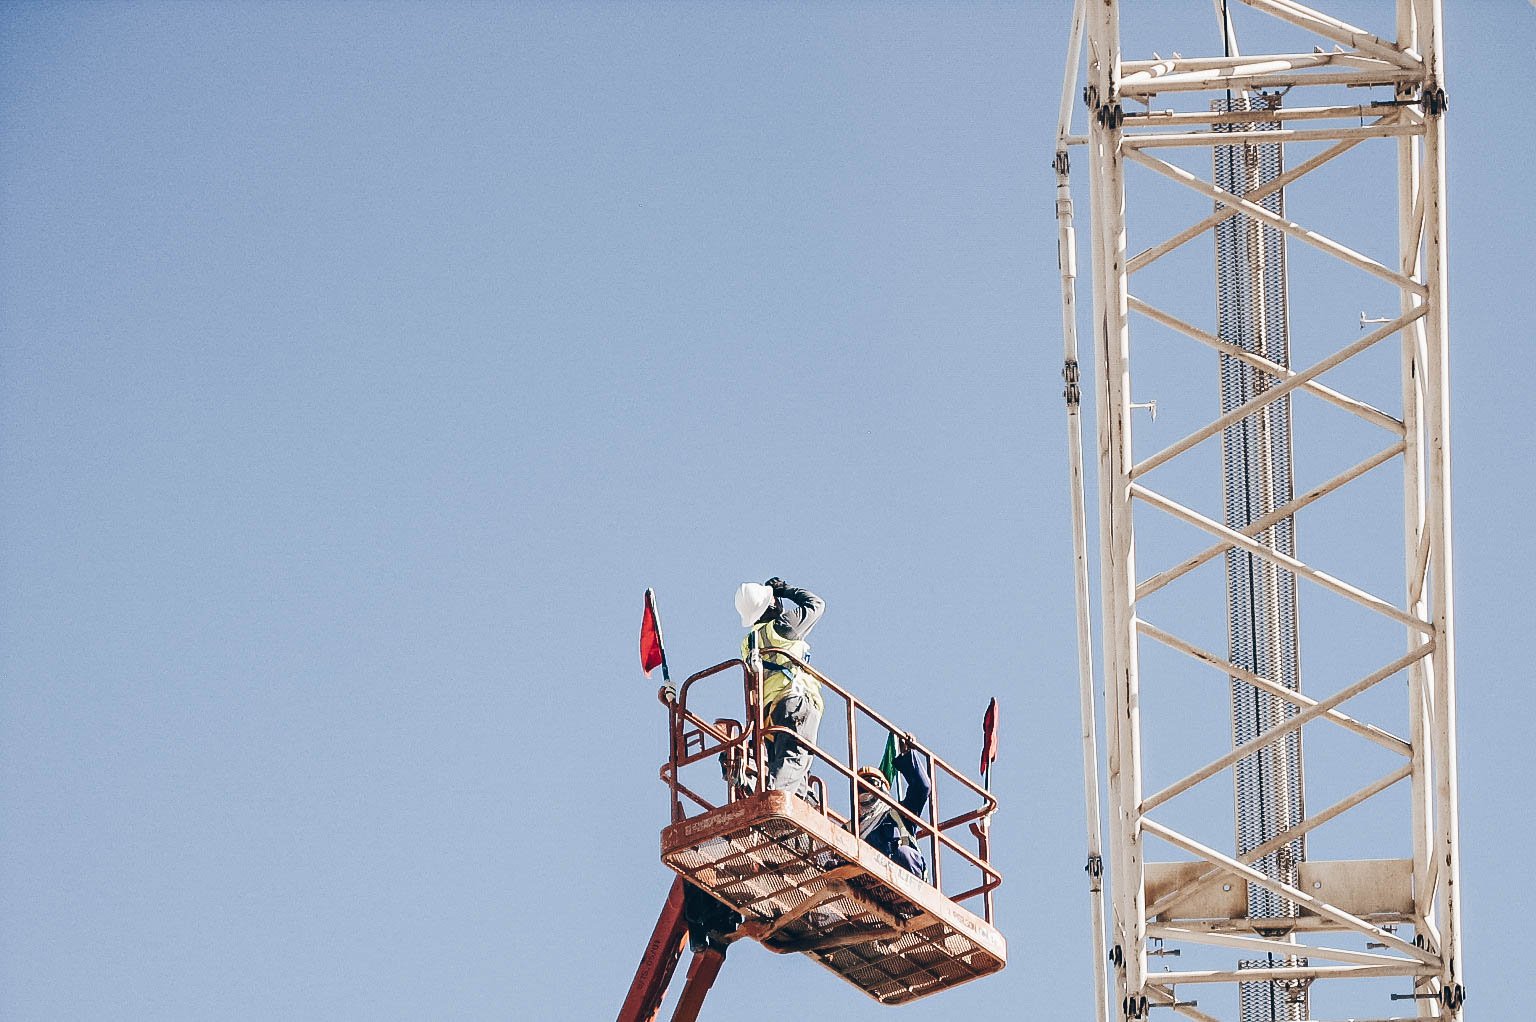 Browse CICB's crane and rigging training programs by role